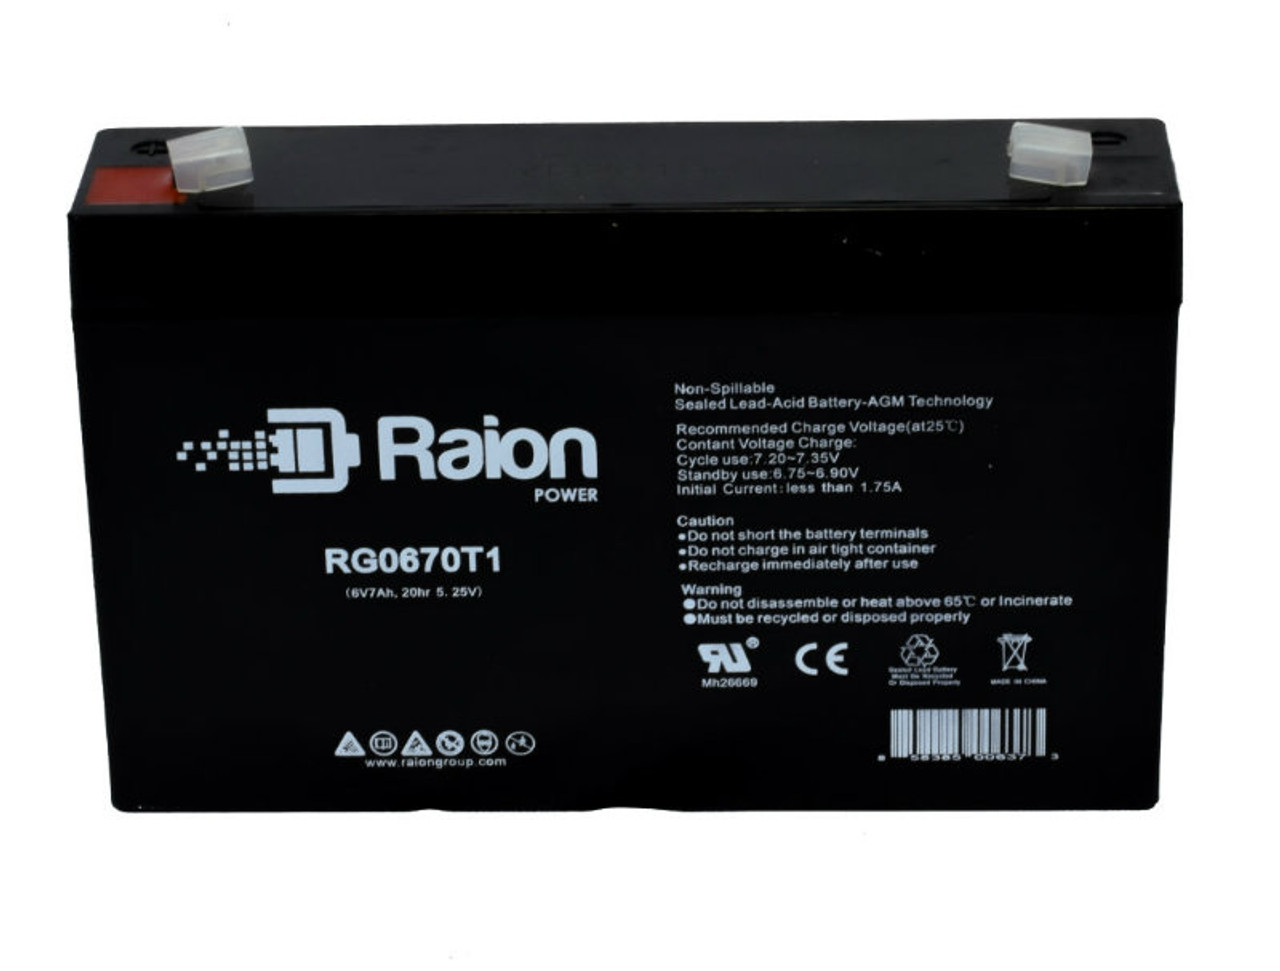 Raion Power RG0670T1 Replacement Battery Cartridge for Lightalarms PB28D